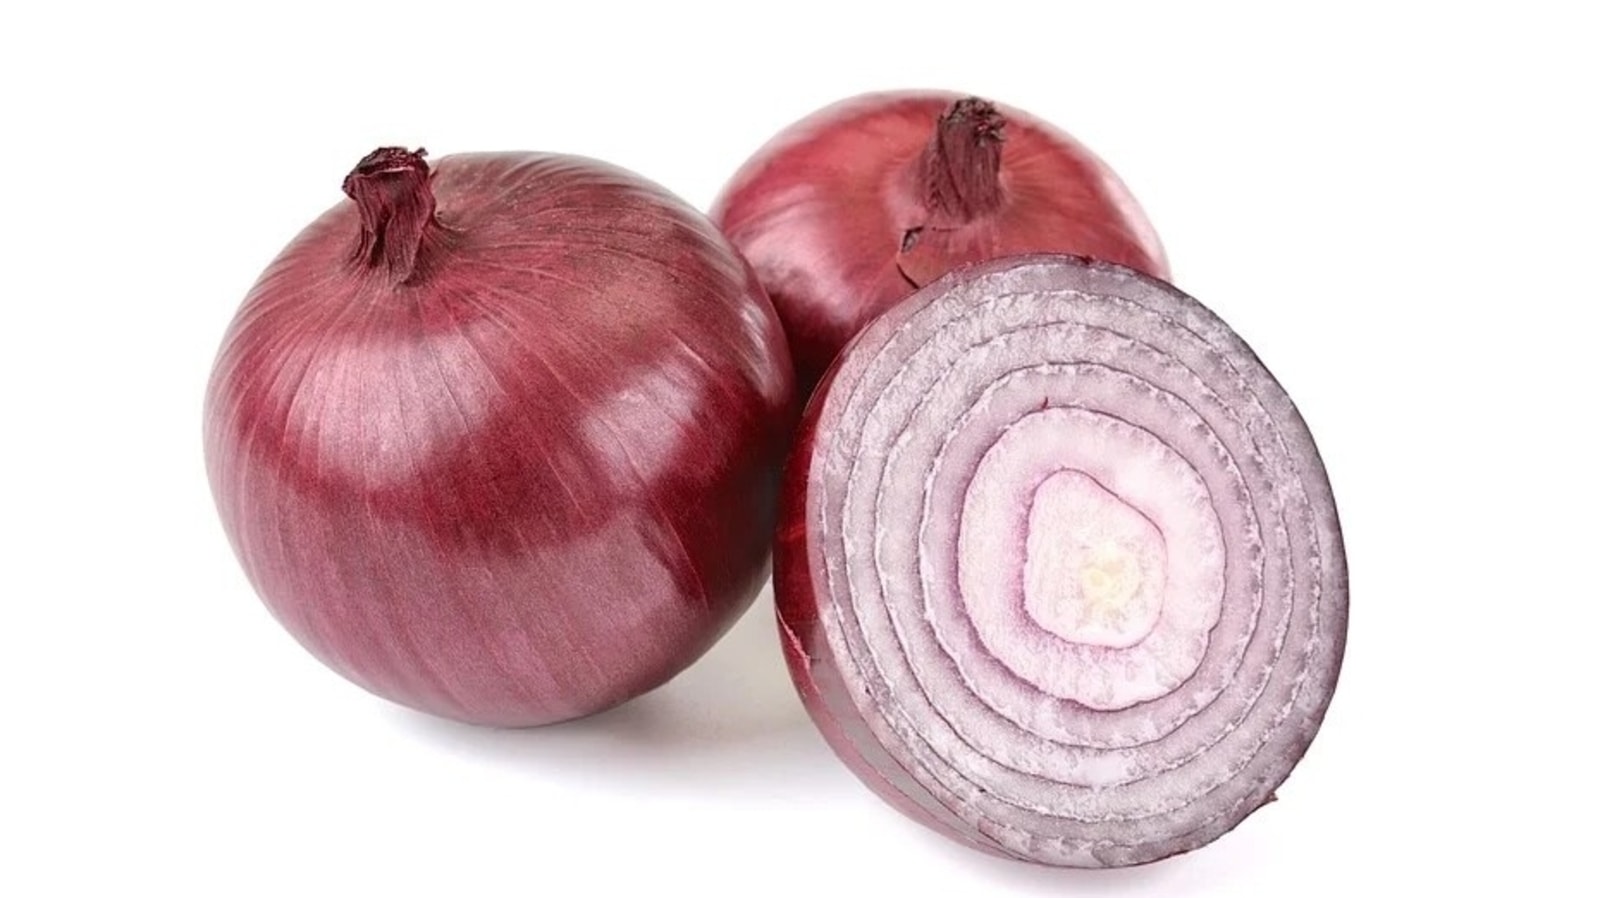 Eat raw onion in summer season for these benefits | Health - Hindustan Times